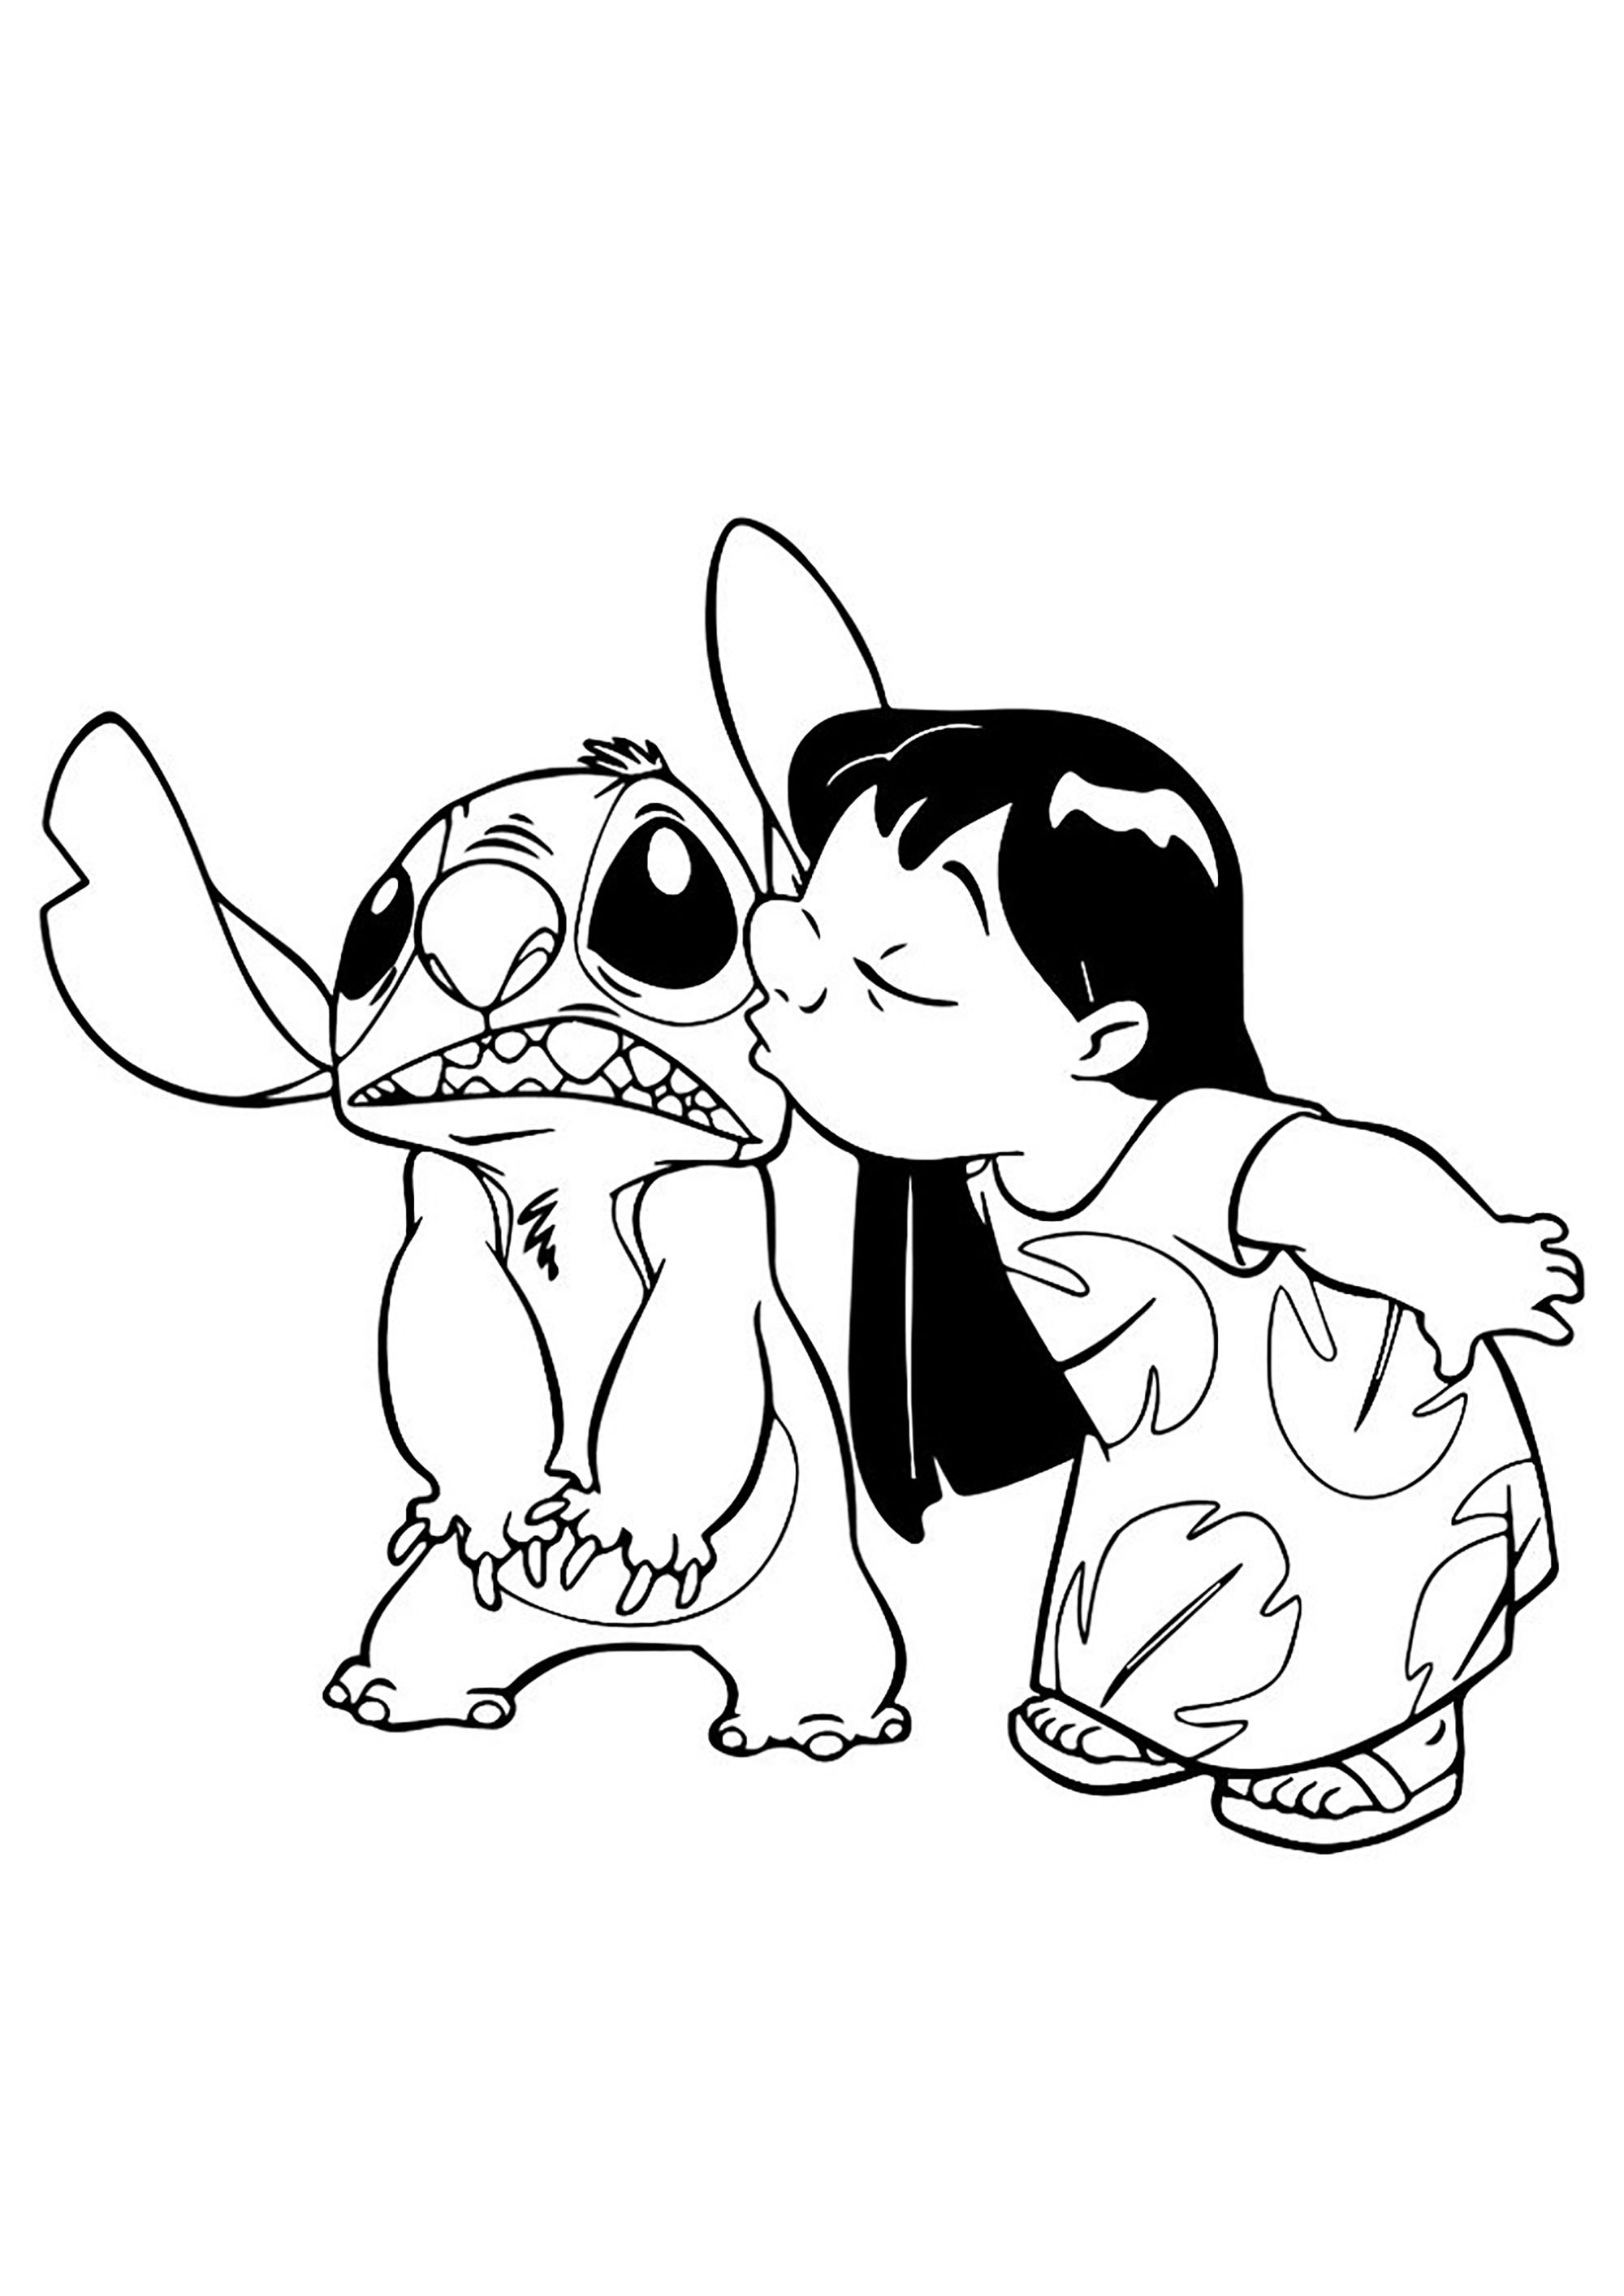 Drawing Lilo and Stitch to print to color